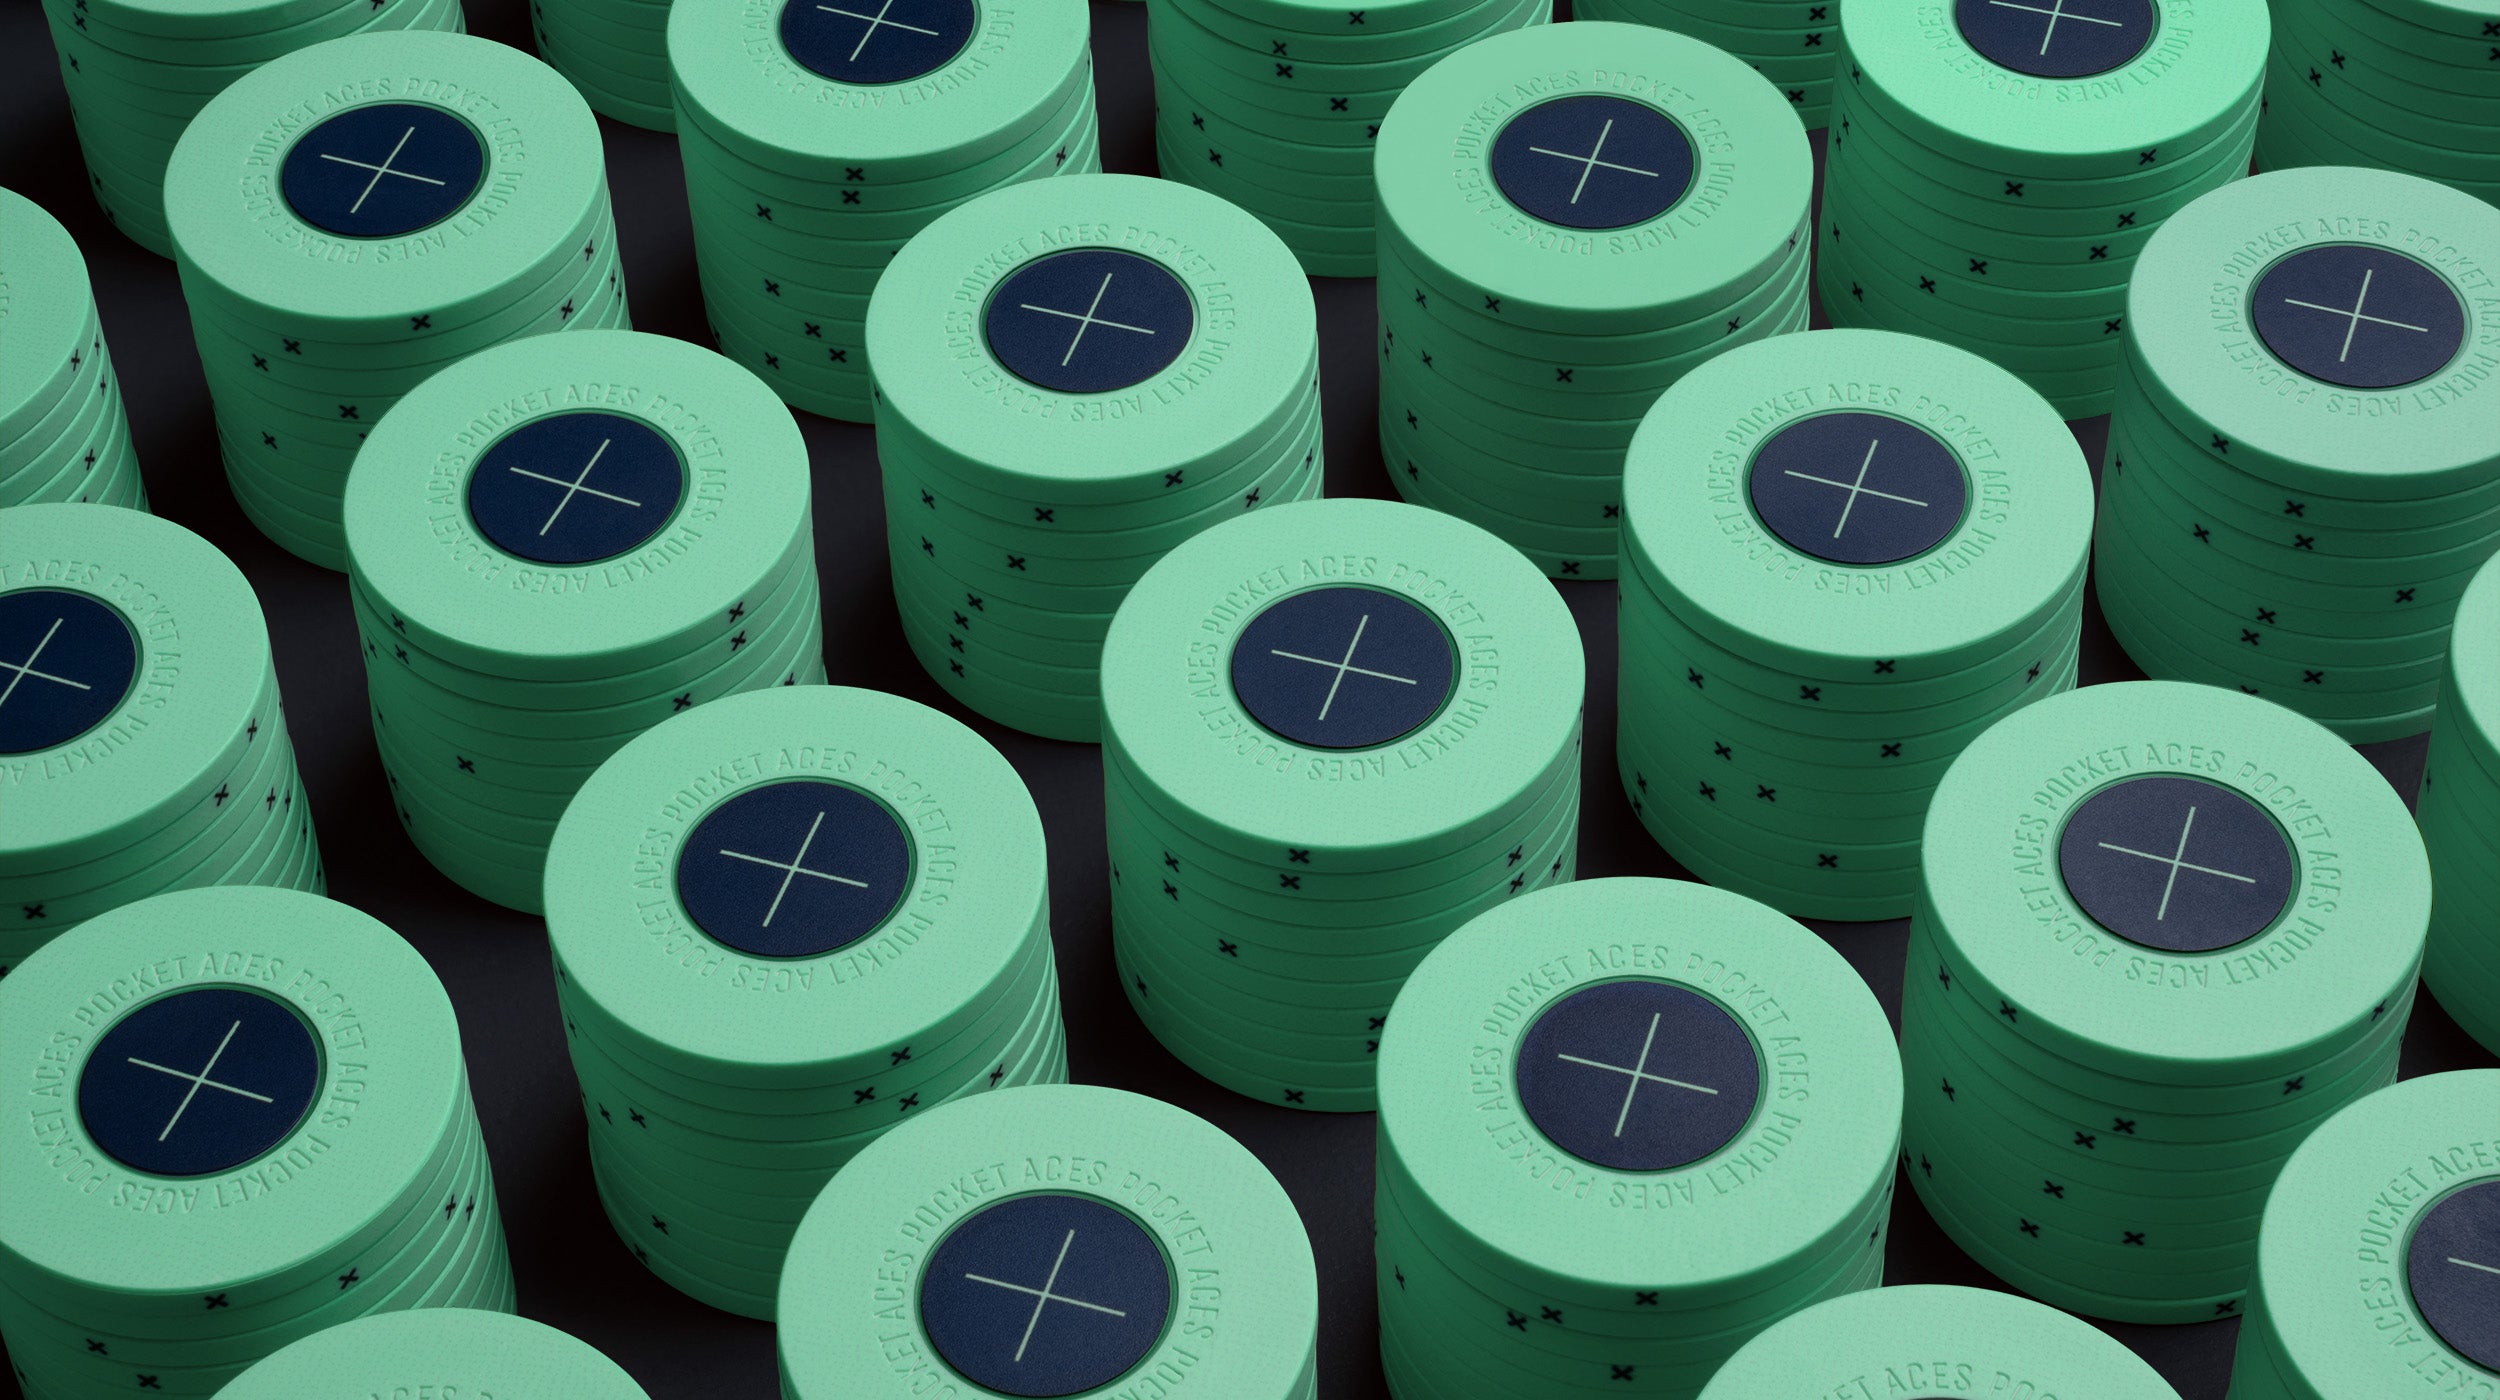 Rows of mint colored poker chips on a table